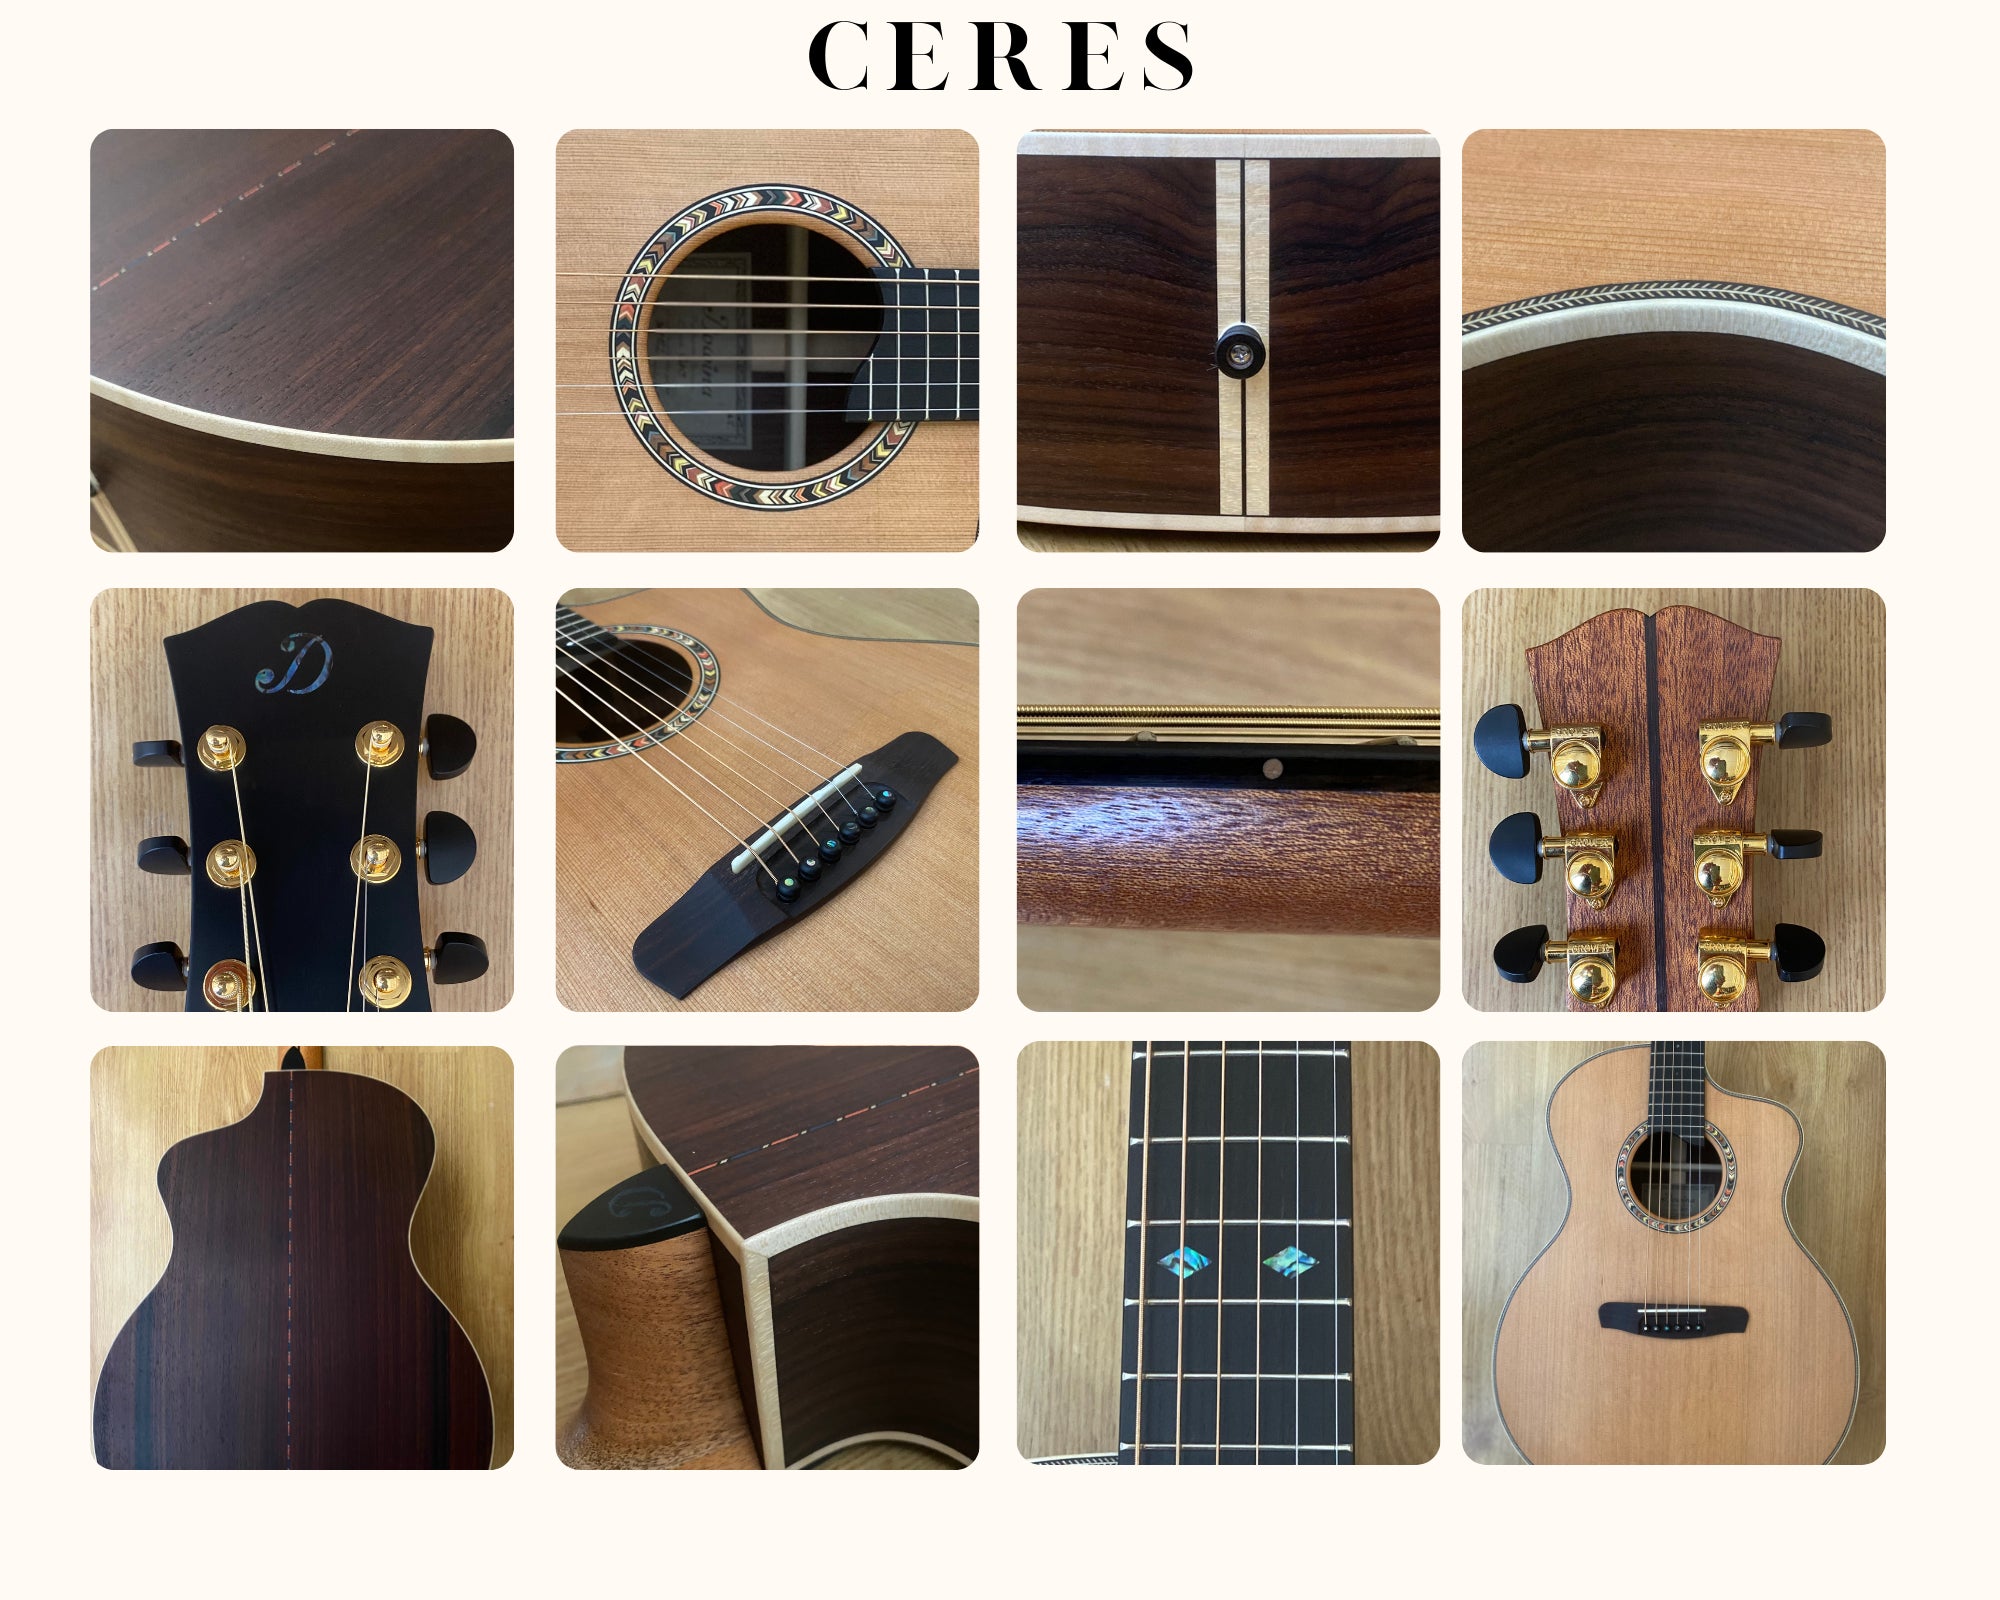 Dowina Rosewood (Ceres) GAC-S Stage Pro Element, Electro Acoustic Guitar for sale at Richards Guitars.